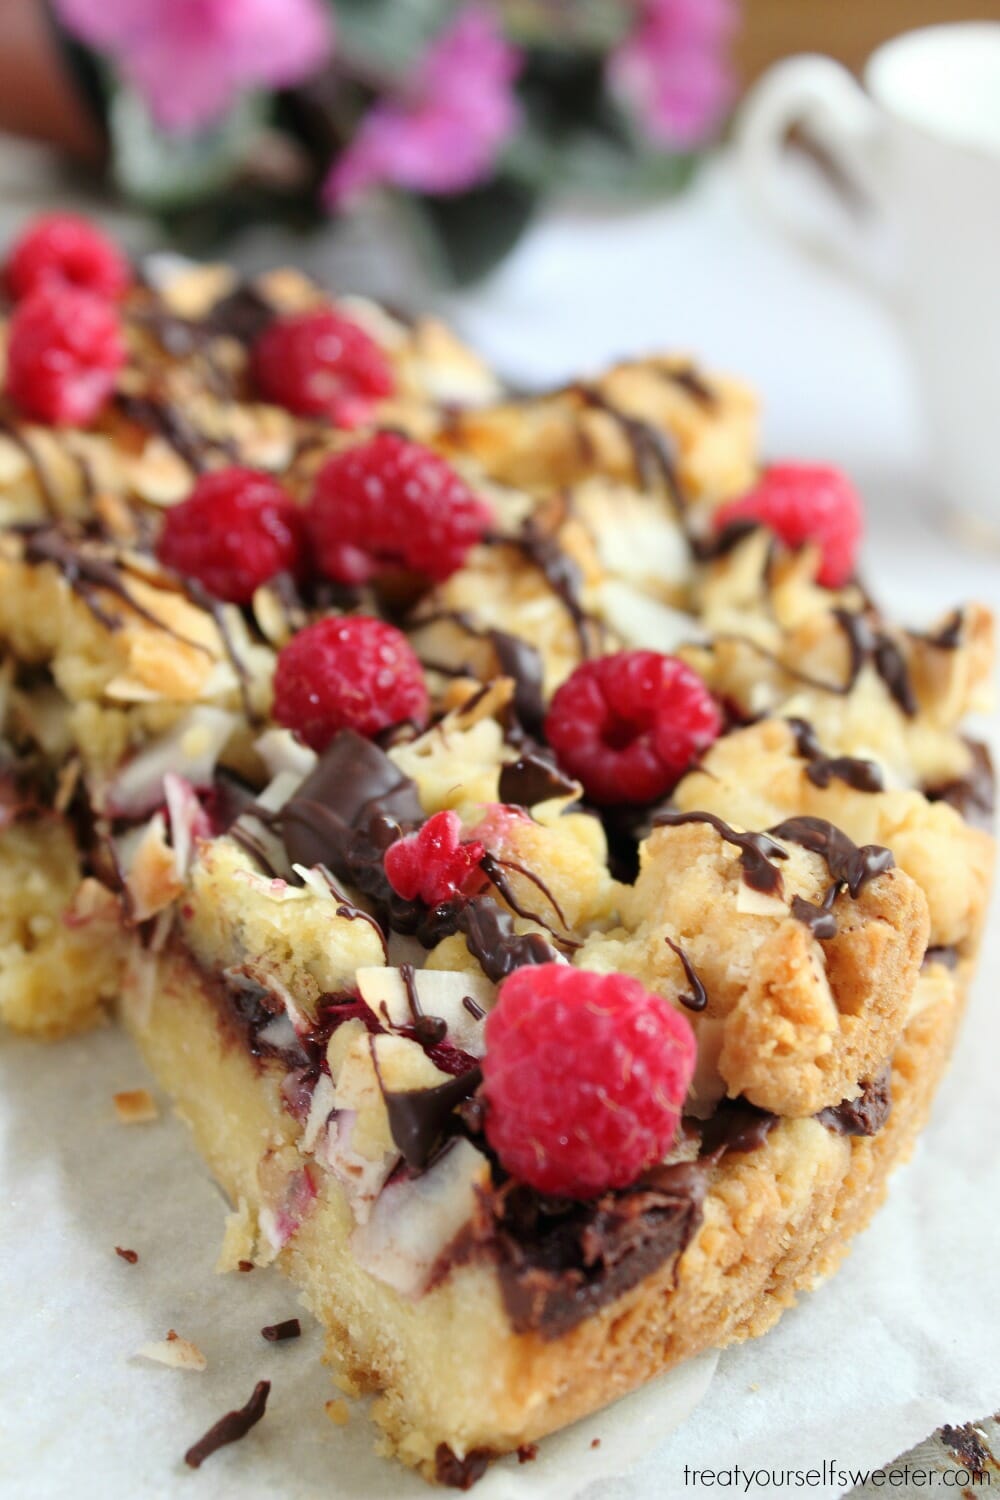 Nutella Raspberry Crumble Cake, All Made in One Bowl!